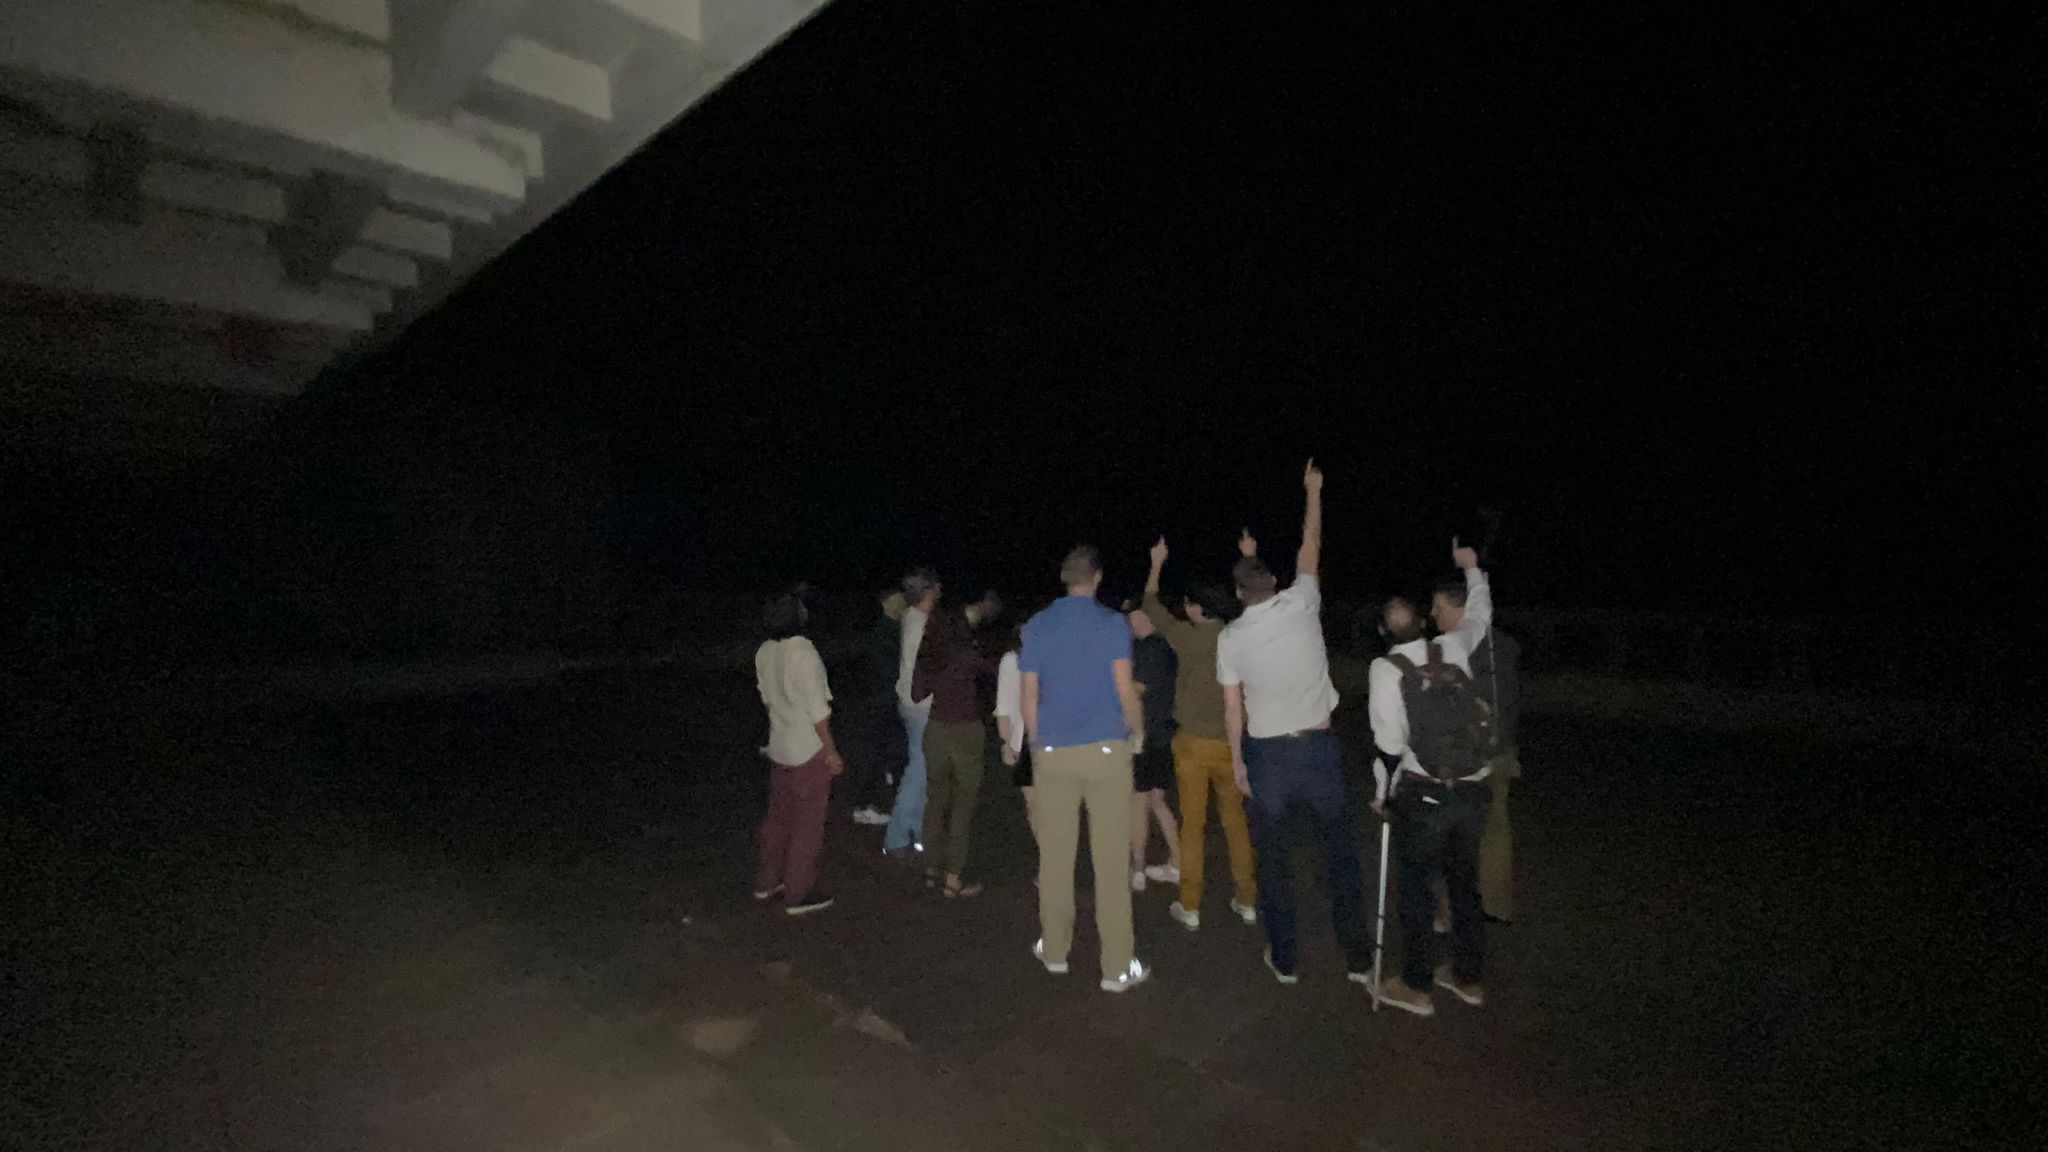 Fig 9. Everyone’s looking up at the Perseid meteor showers!